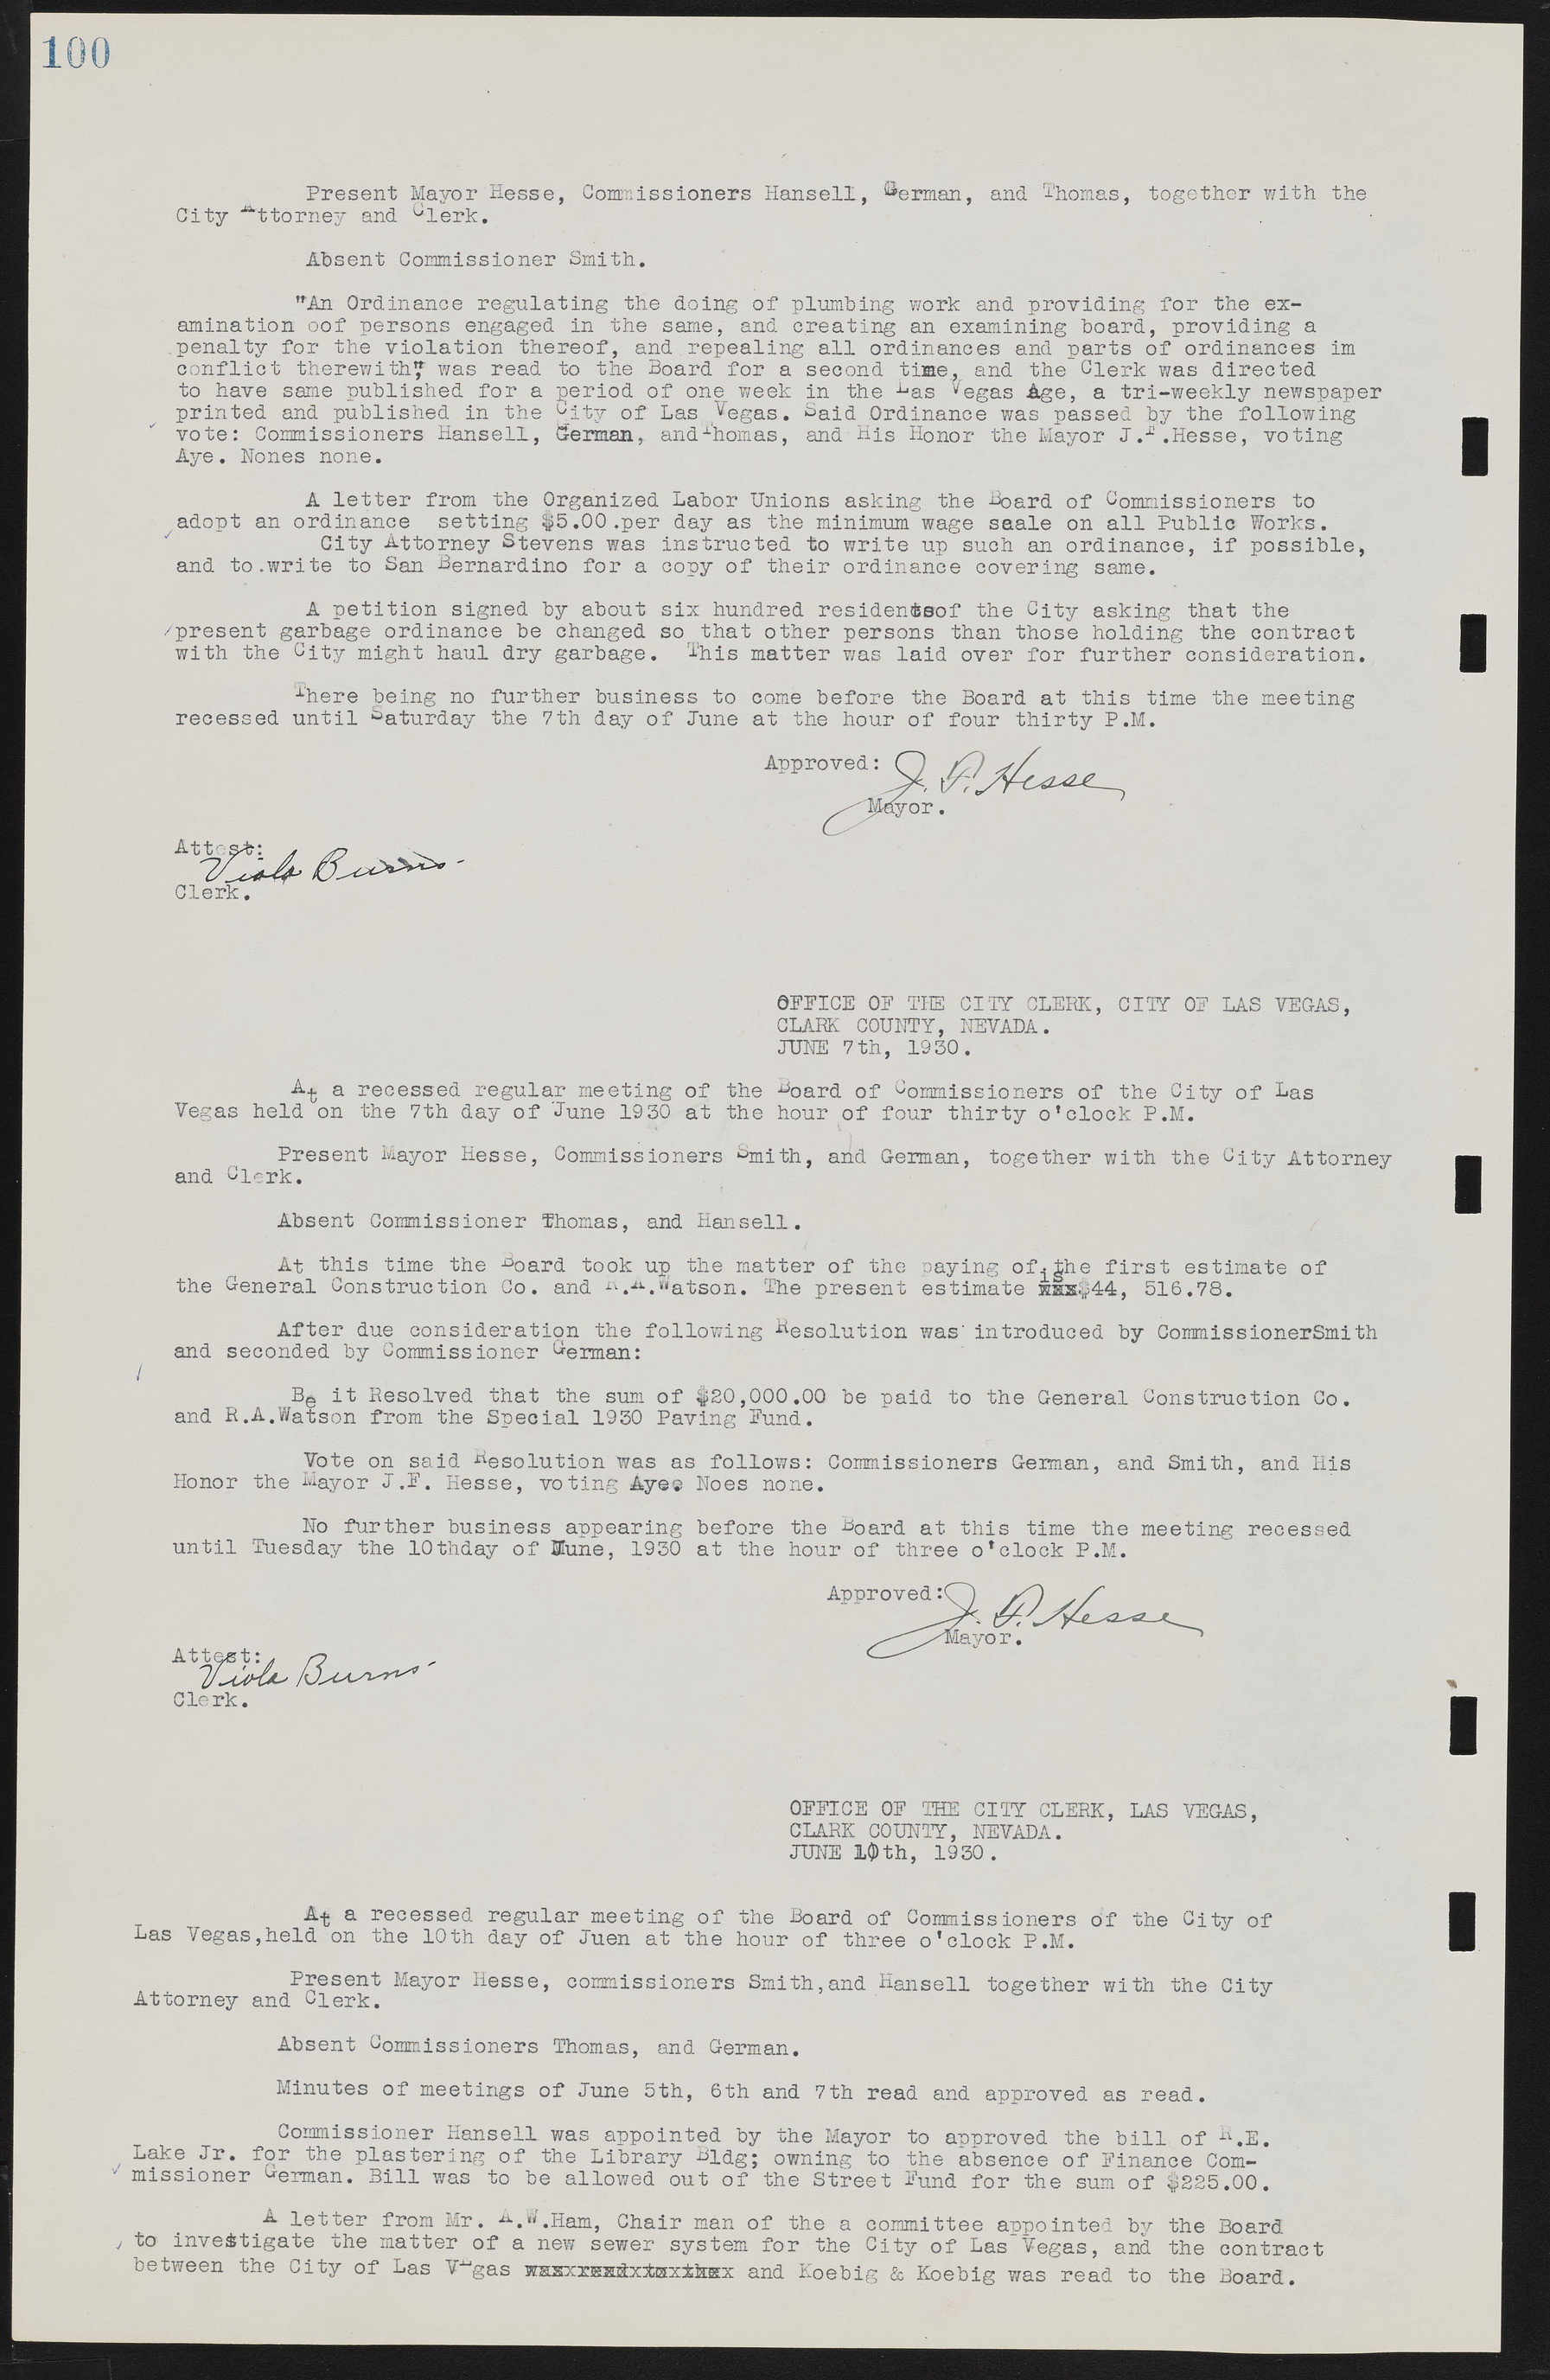 Las Vegas City Commission Minutes, May 14, 1929 to February 11, 1937, lvc000003-106